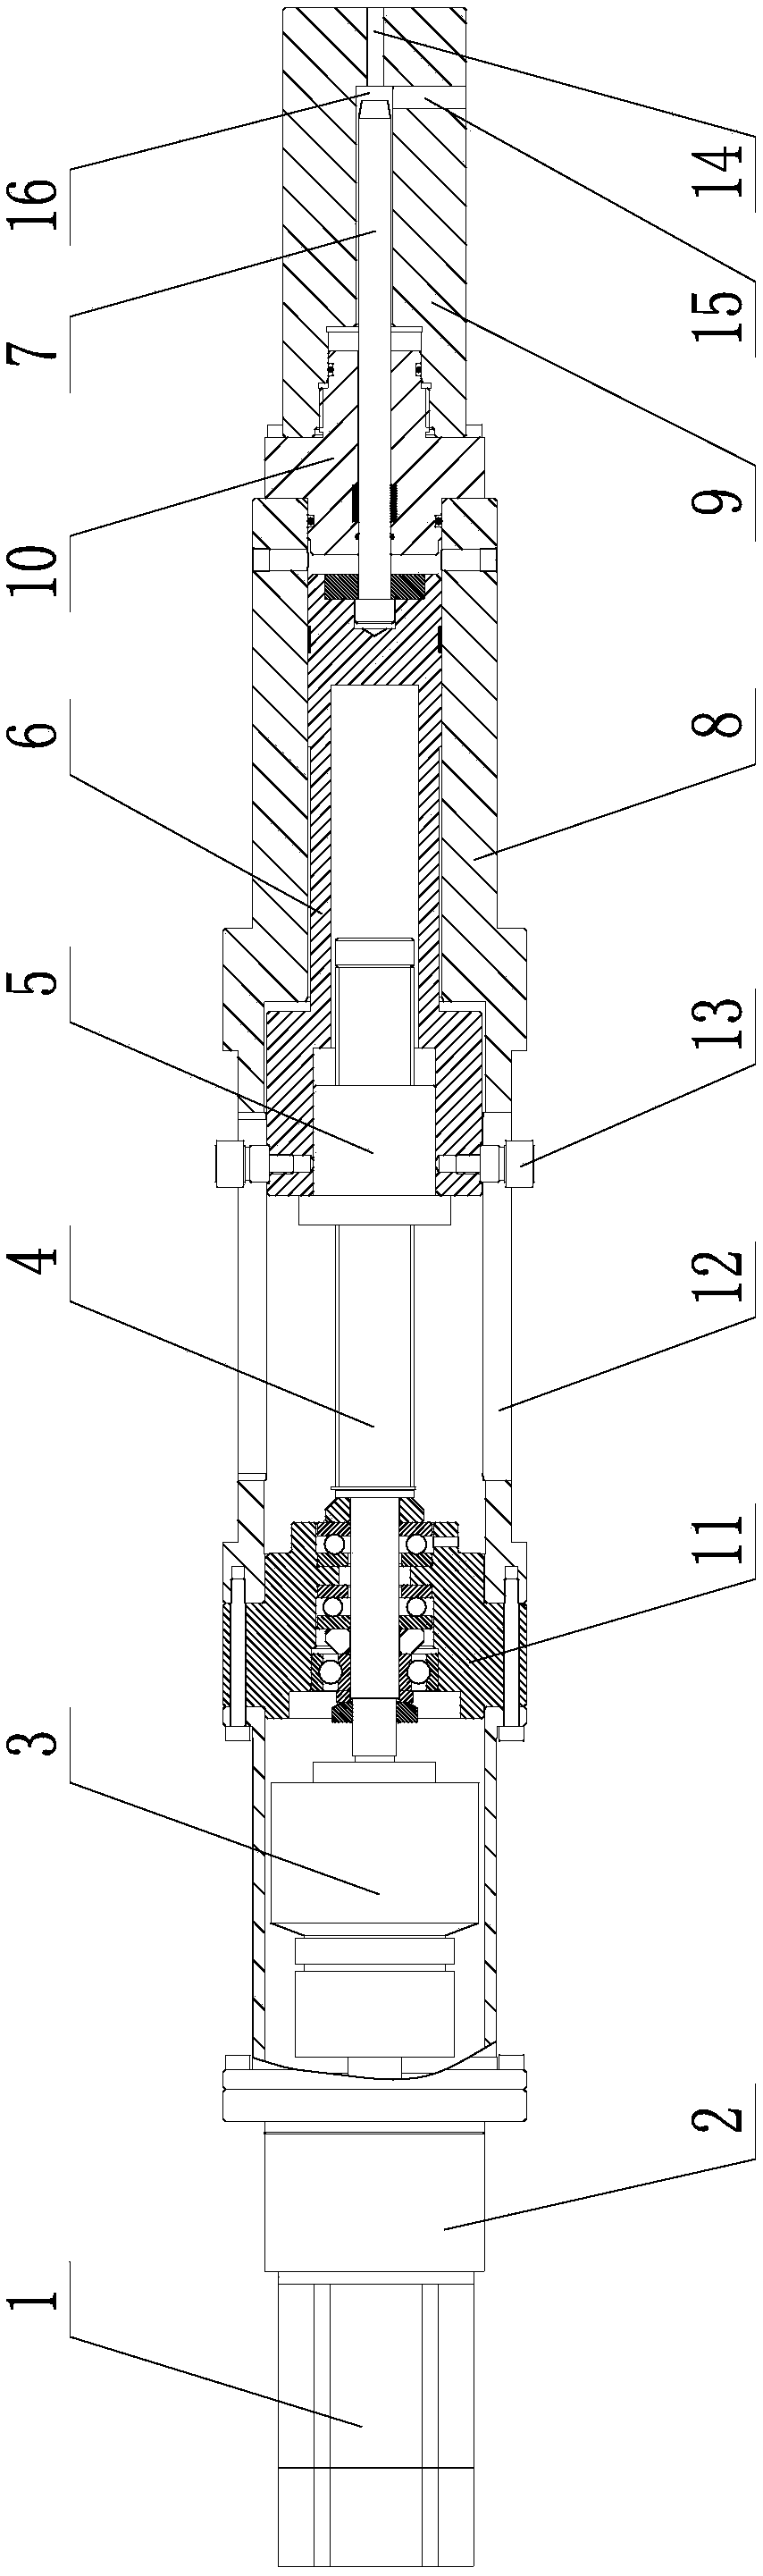 A high-pressure and low-flow core displacement pump based on rock laboratory experiments